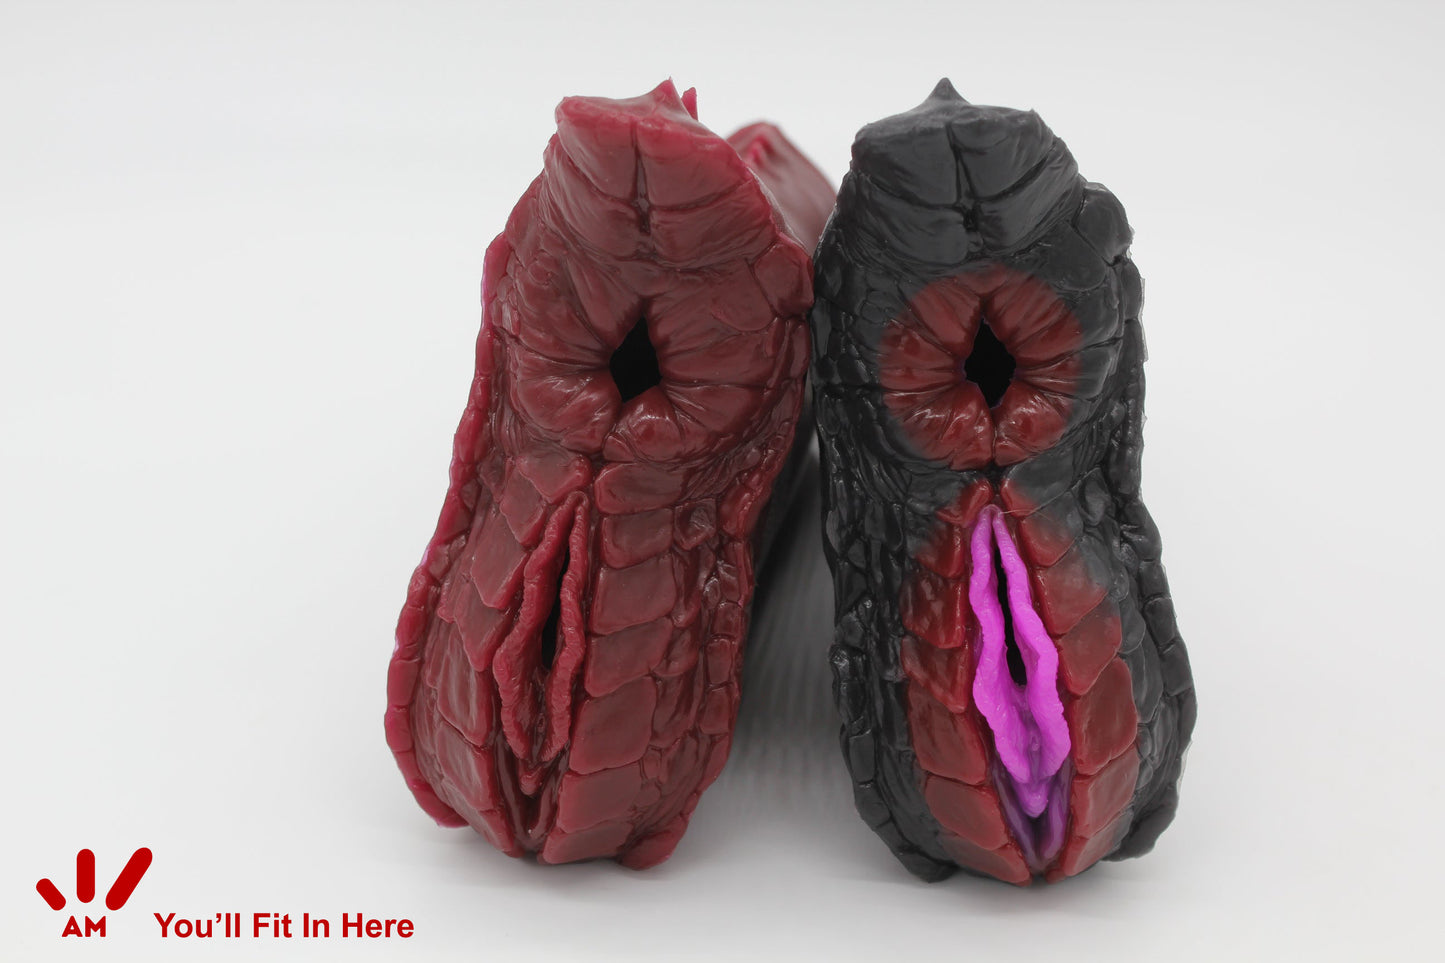 Two Hole Scalie Dragon Sex Toy